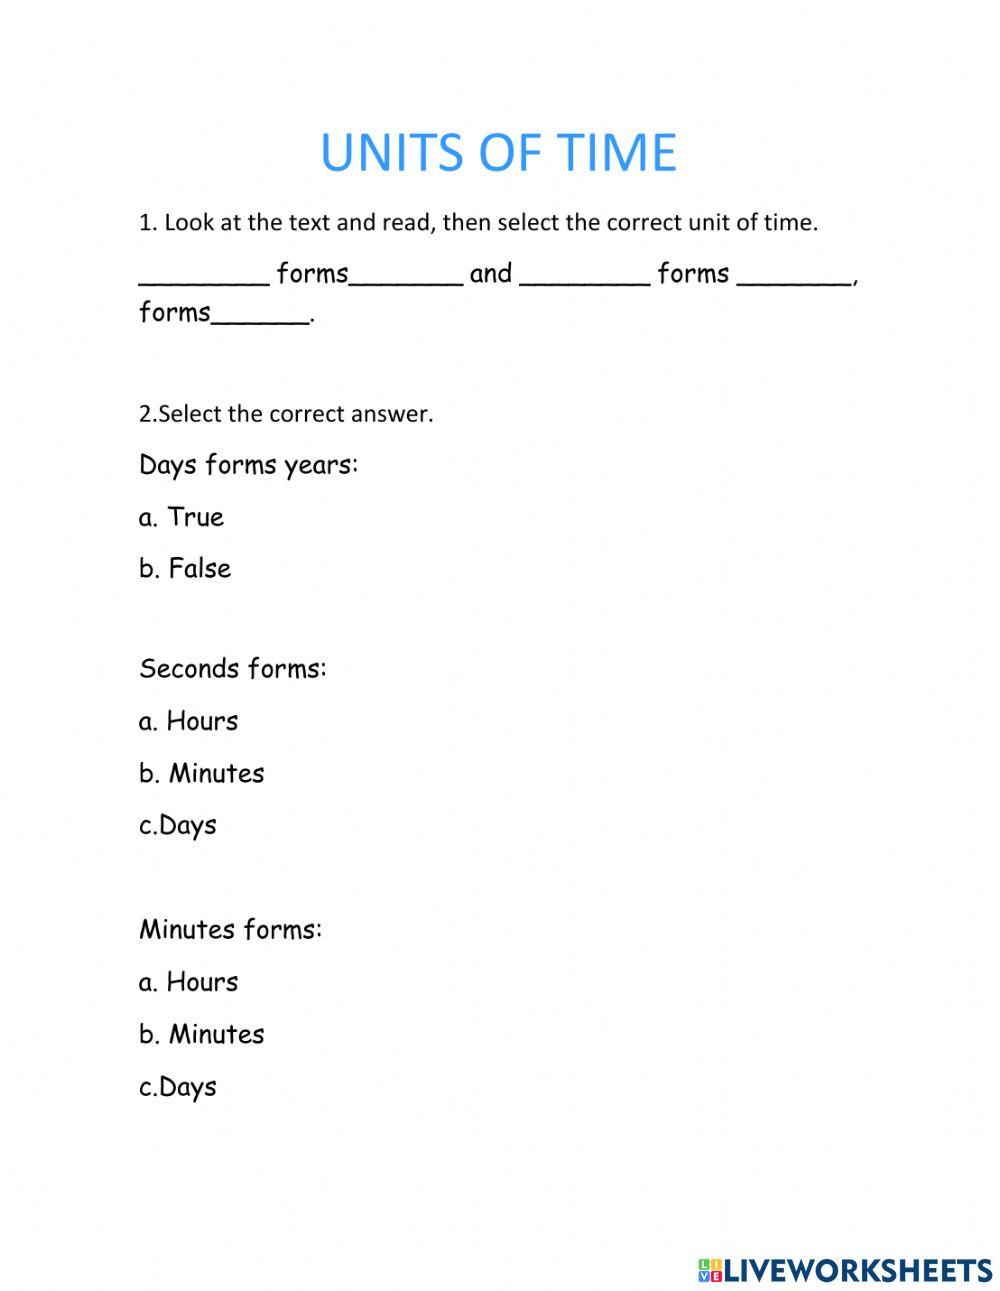 Units of time